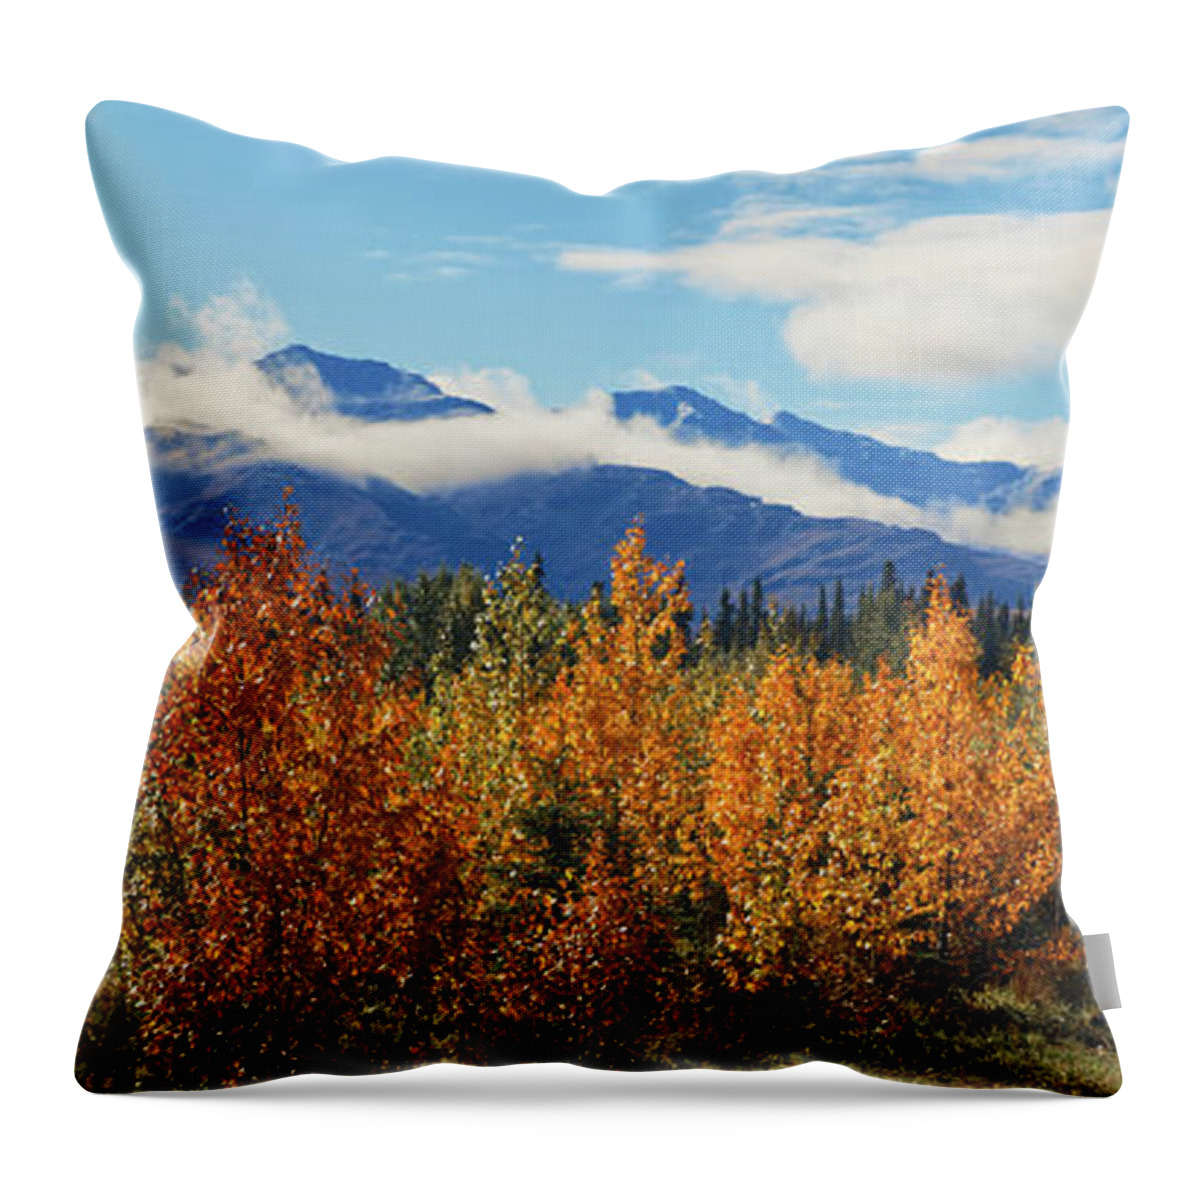 Fall Throw Pillow featuring the photograph Alaskan Fall Mountain Foliage by Doolittle Photography and Art